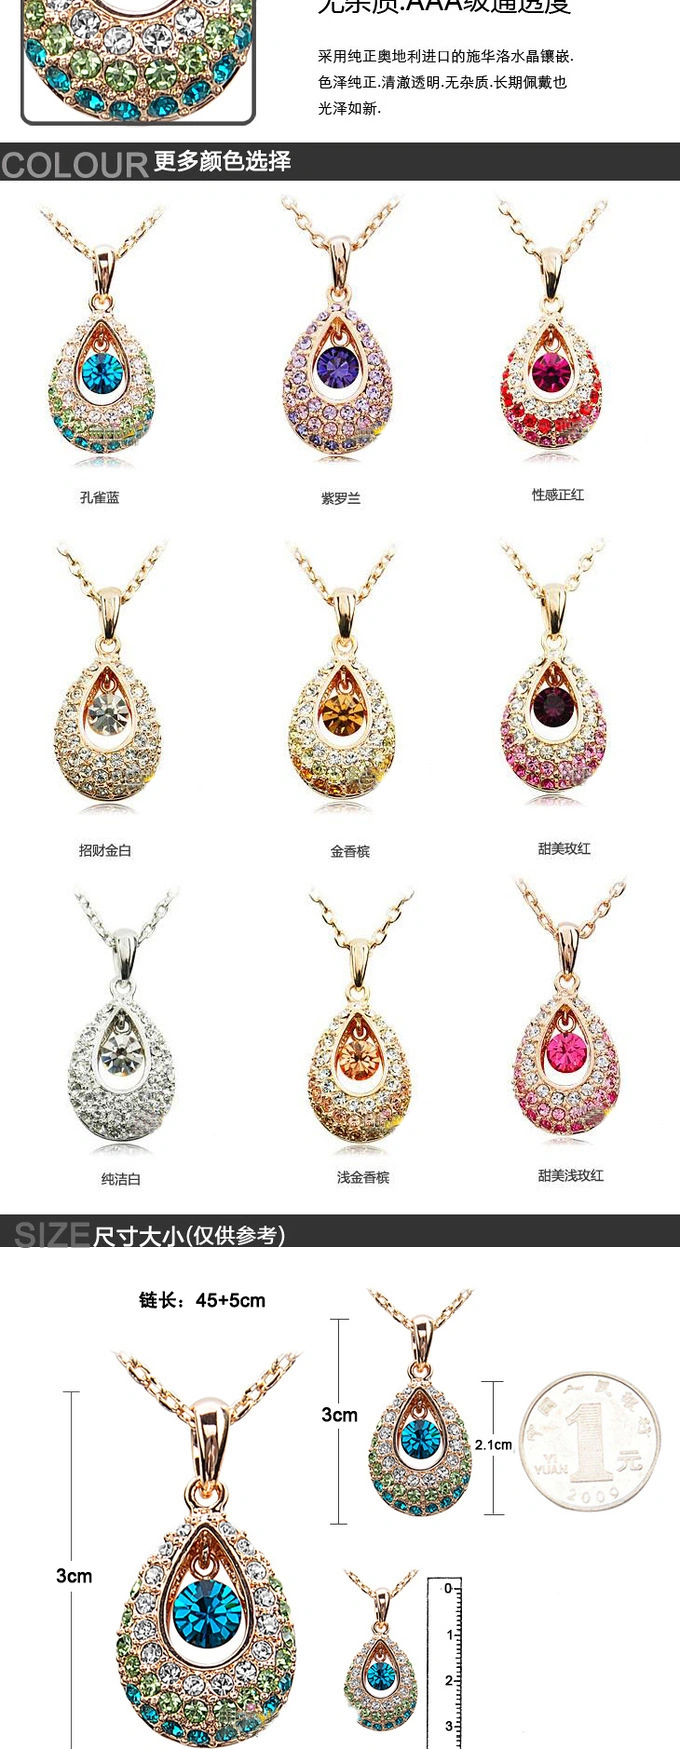 Hottest Gold/Silver Teardrop Crystal Necklace Jewelry, Colorful Crystal Rhinestone Necklace Cheap Jewelry Wholesale